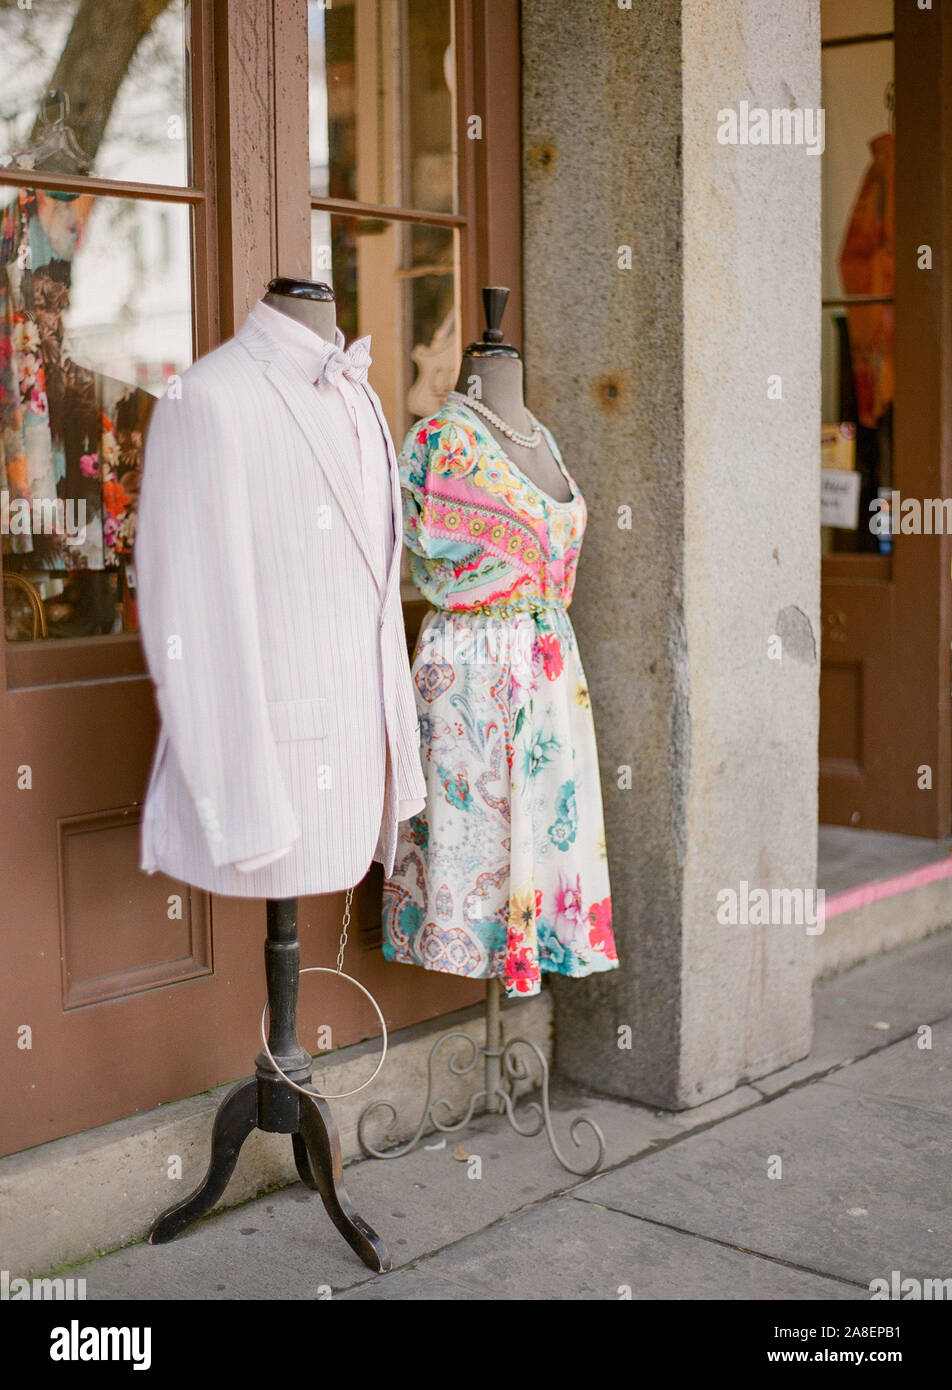 A seersucker sport coat with bowtie and a woman's dress on a  mannequin in front of a shop in the French Quarter, New Orleans, Louisiana Stock Photo